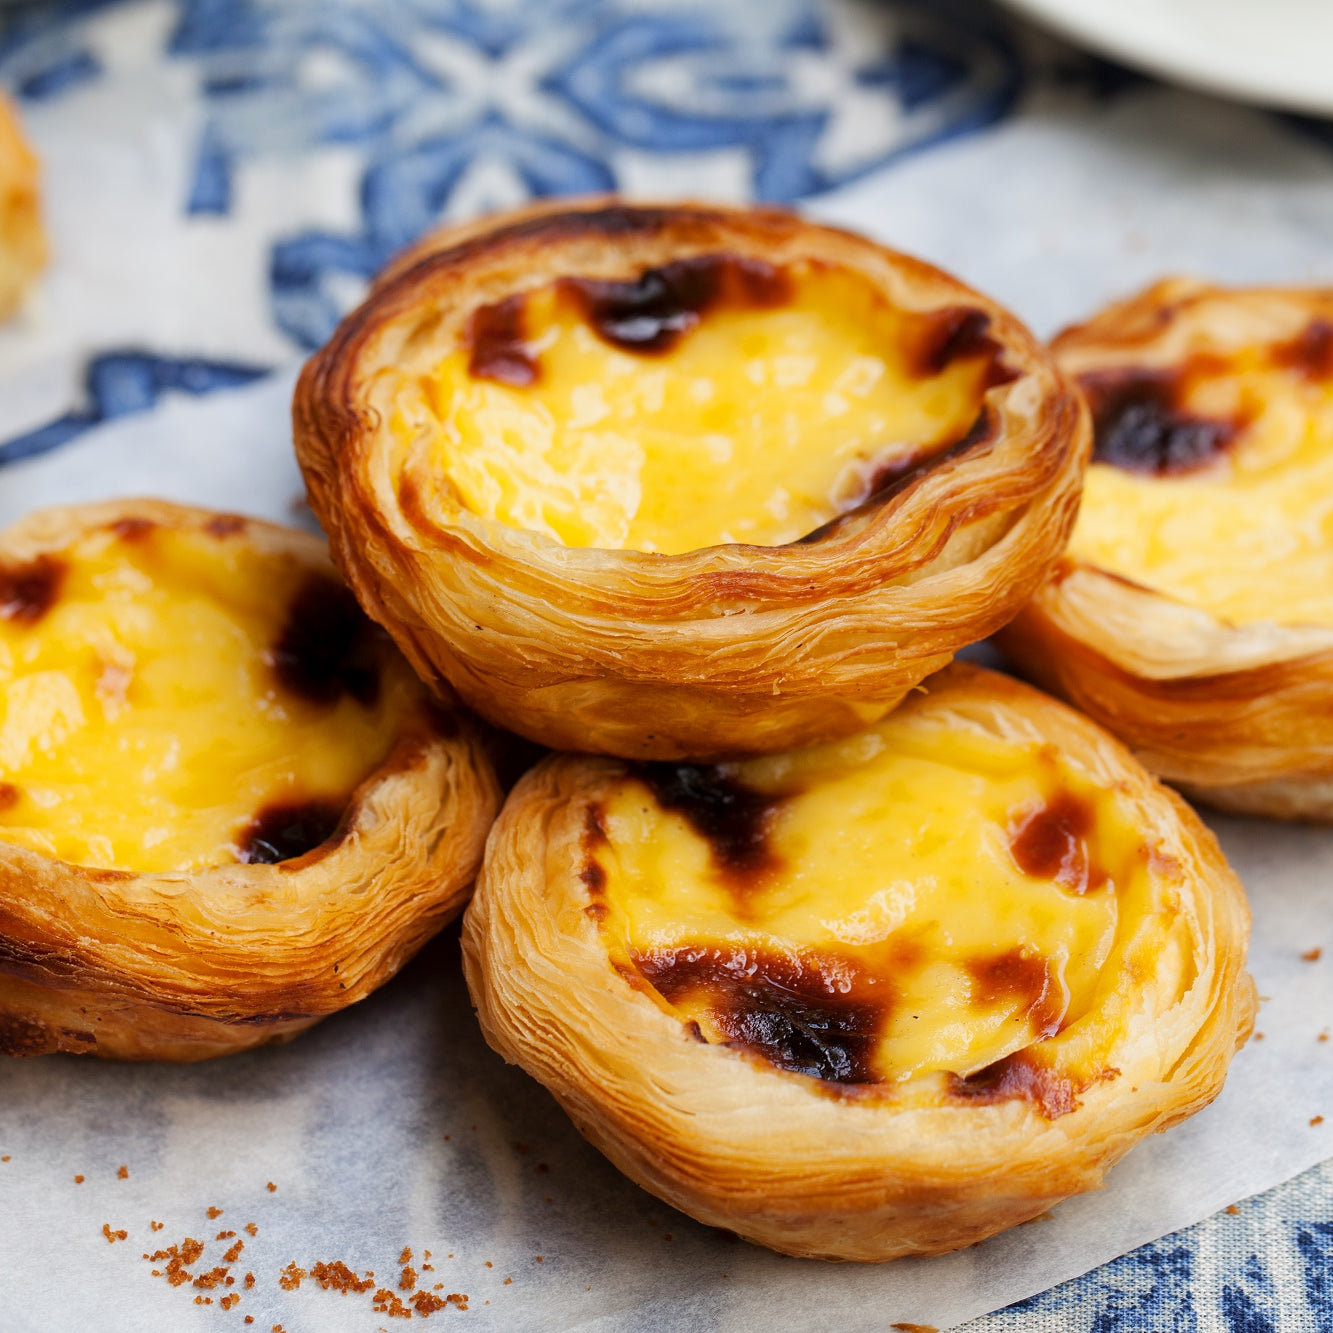 Buynatas.com is a pasteis de nata online shop. We offer several delicious flavors of authentic Portuguese pasteis de nata. All orders in the continental United States include free 2-day shipping. 